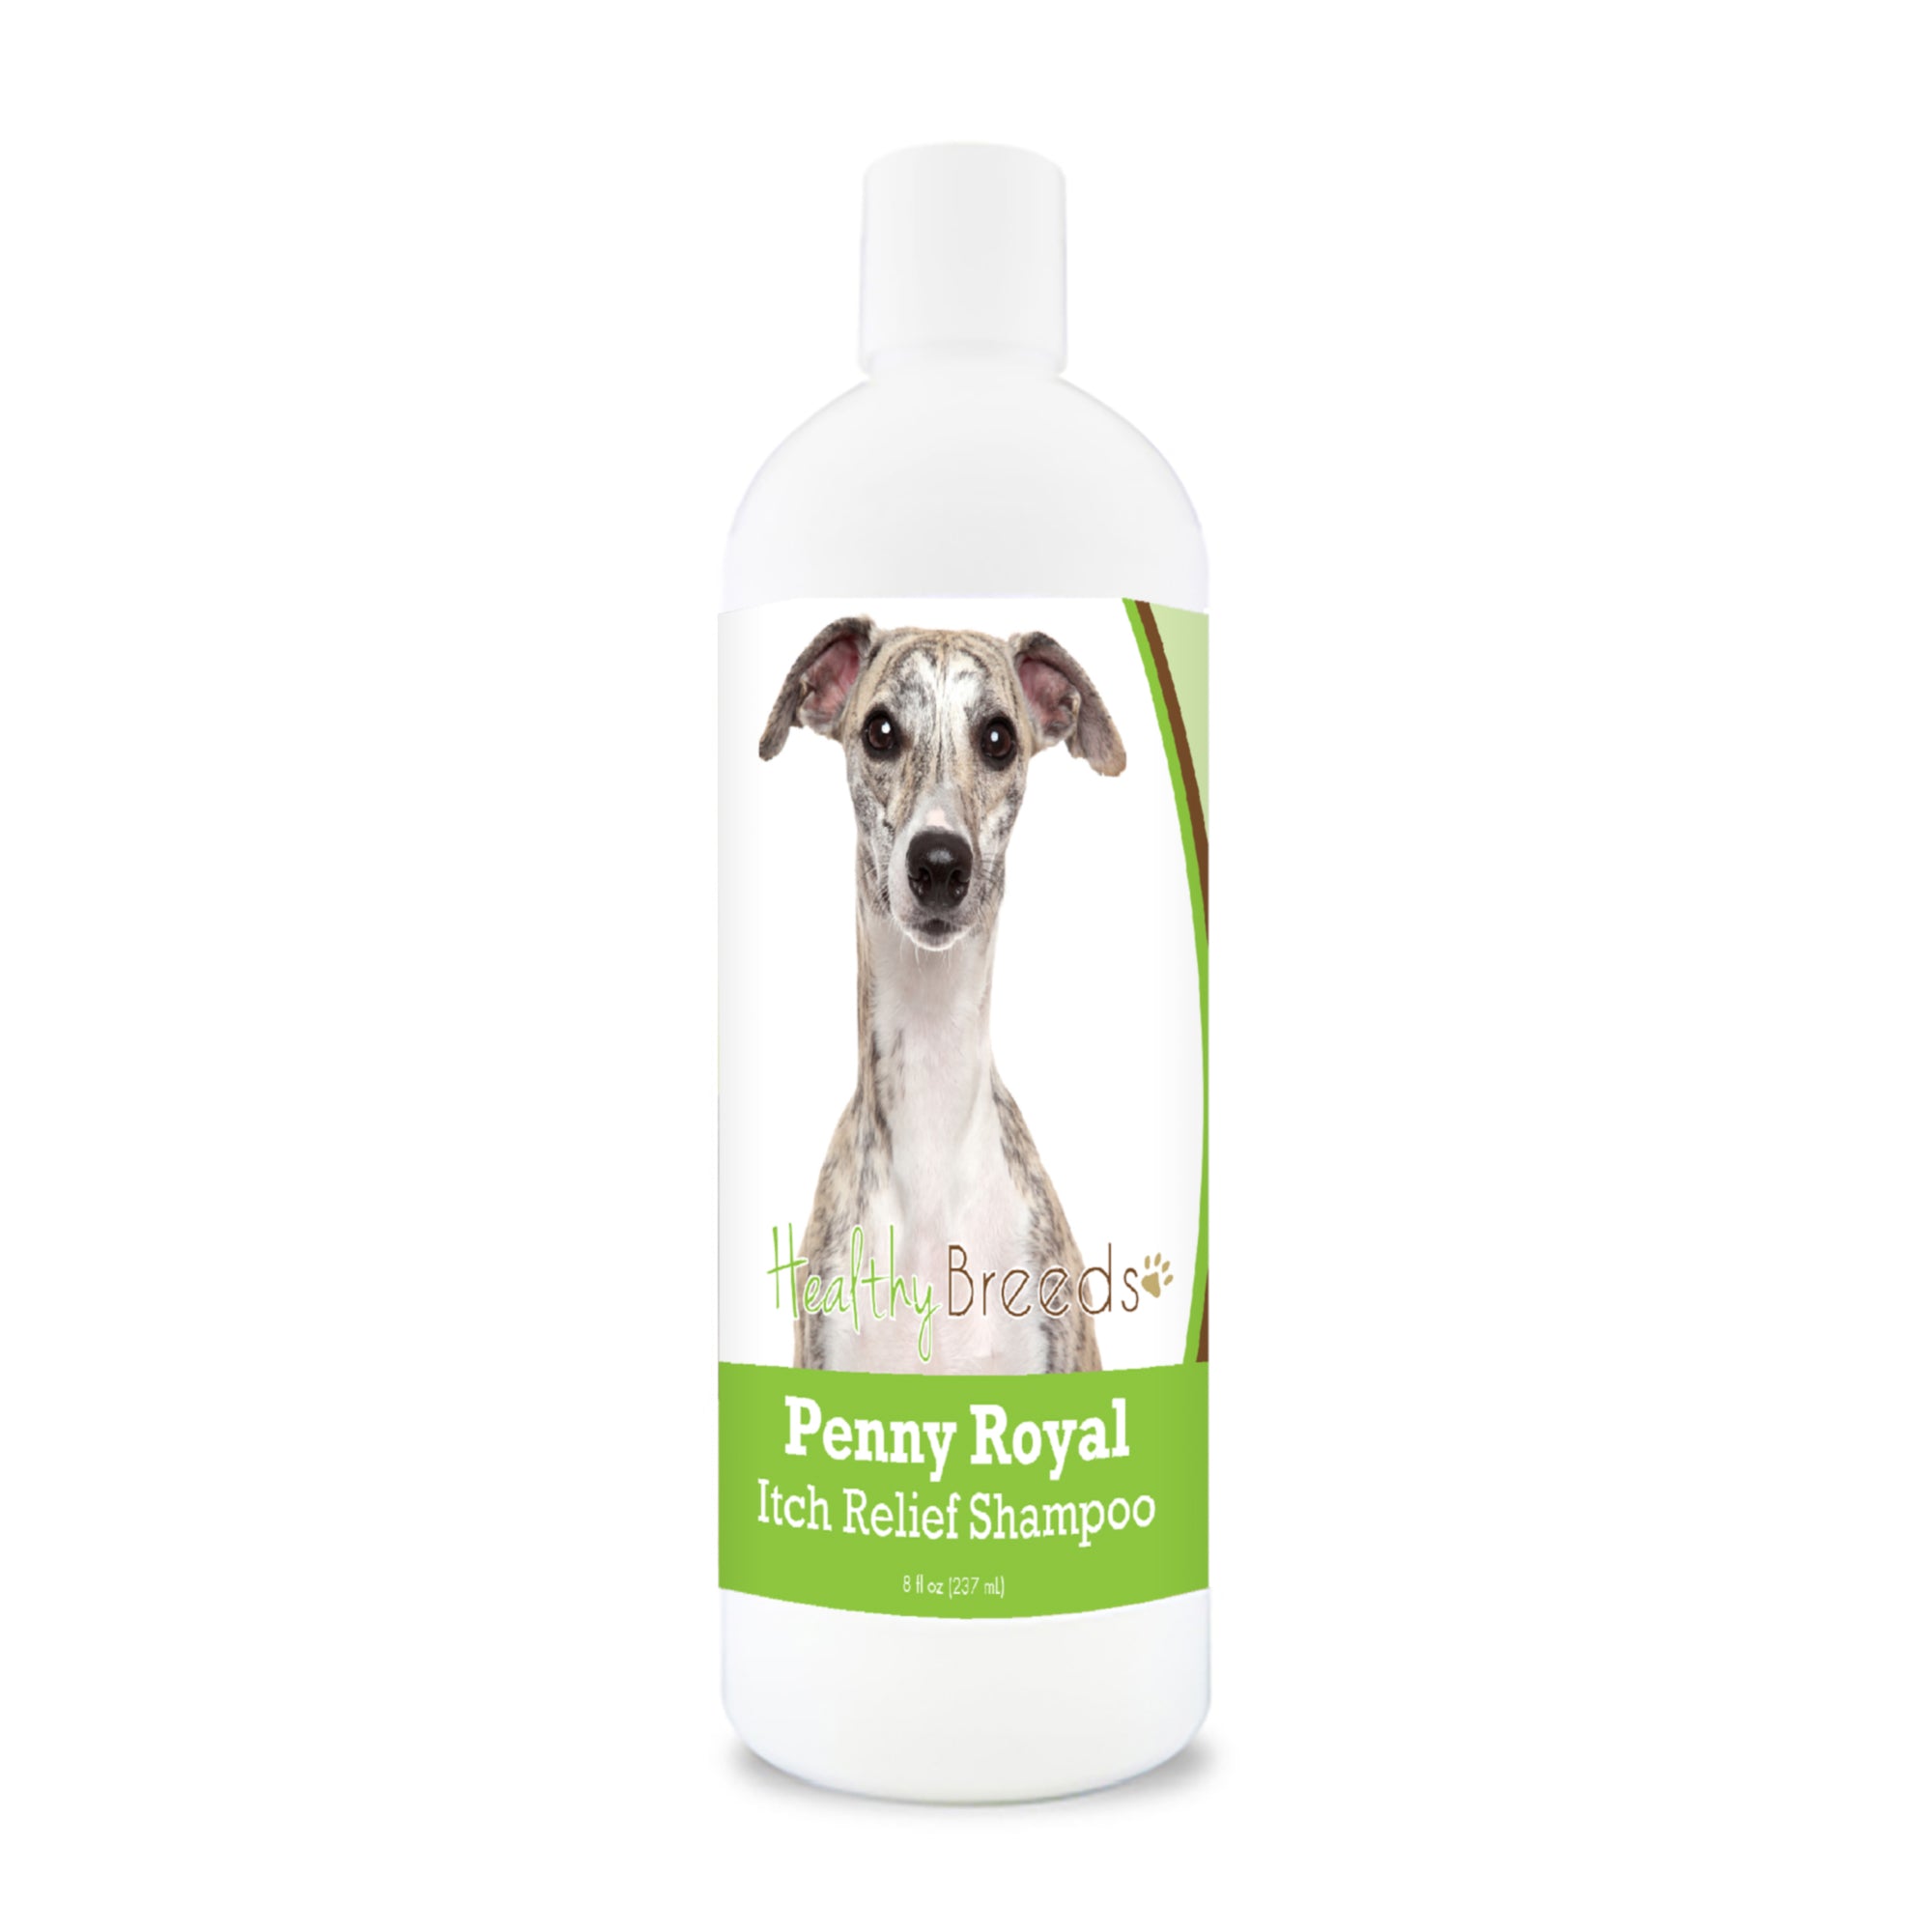 Whippet Penny Royal Itch Relief Shampoo 8 oz